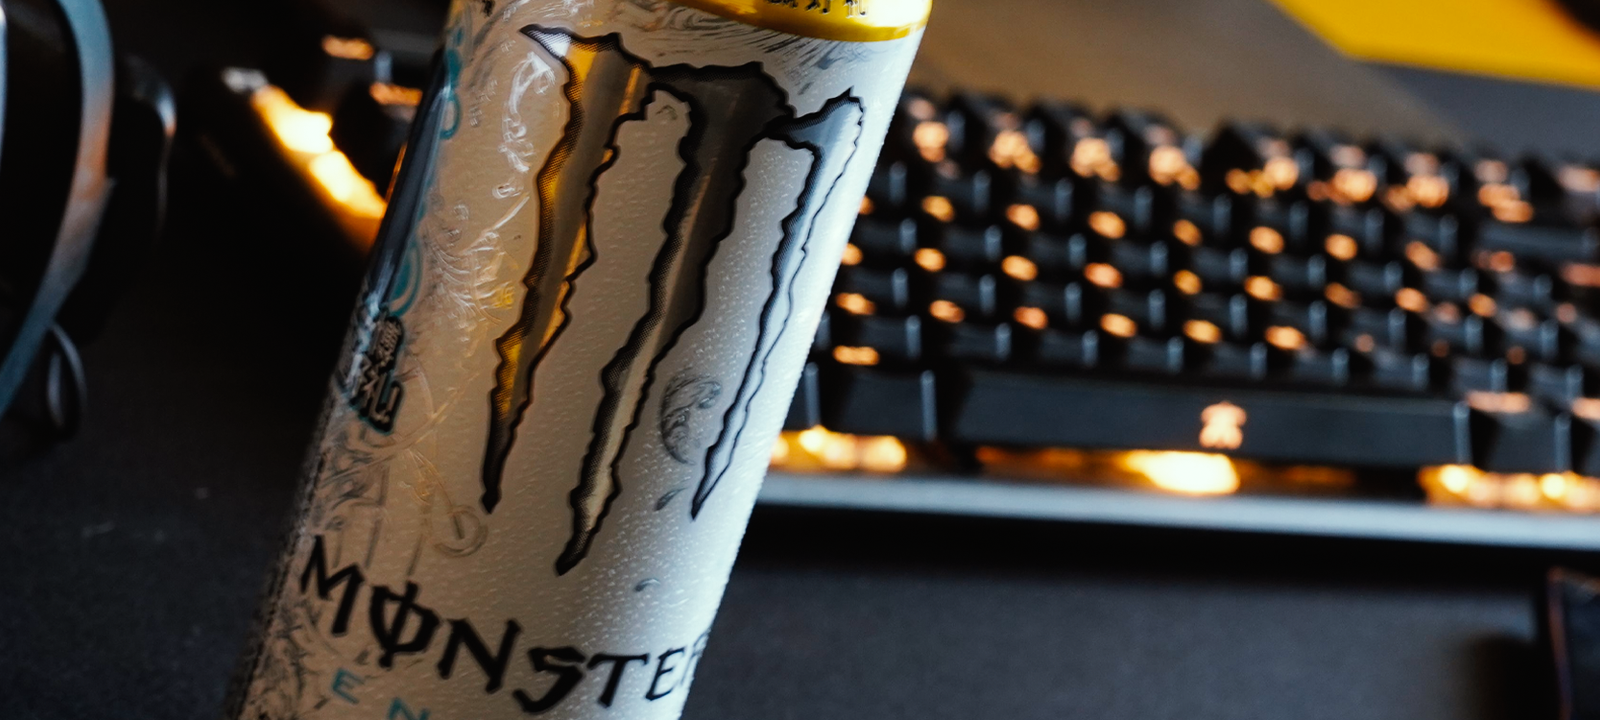 Can of monster by a Fnatic keyboard